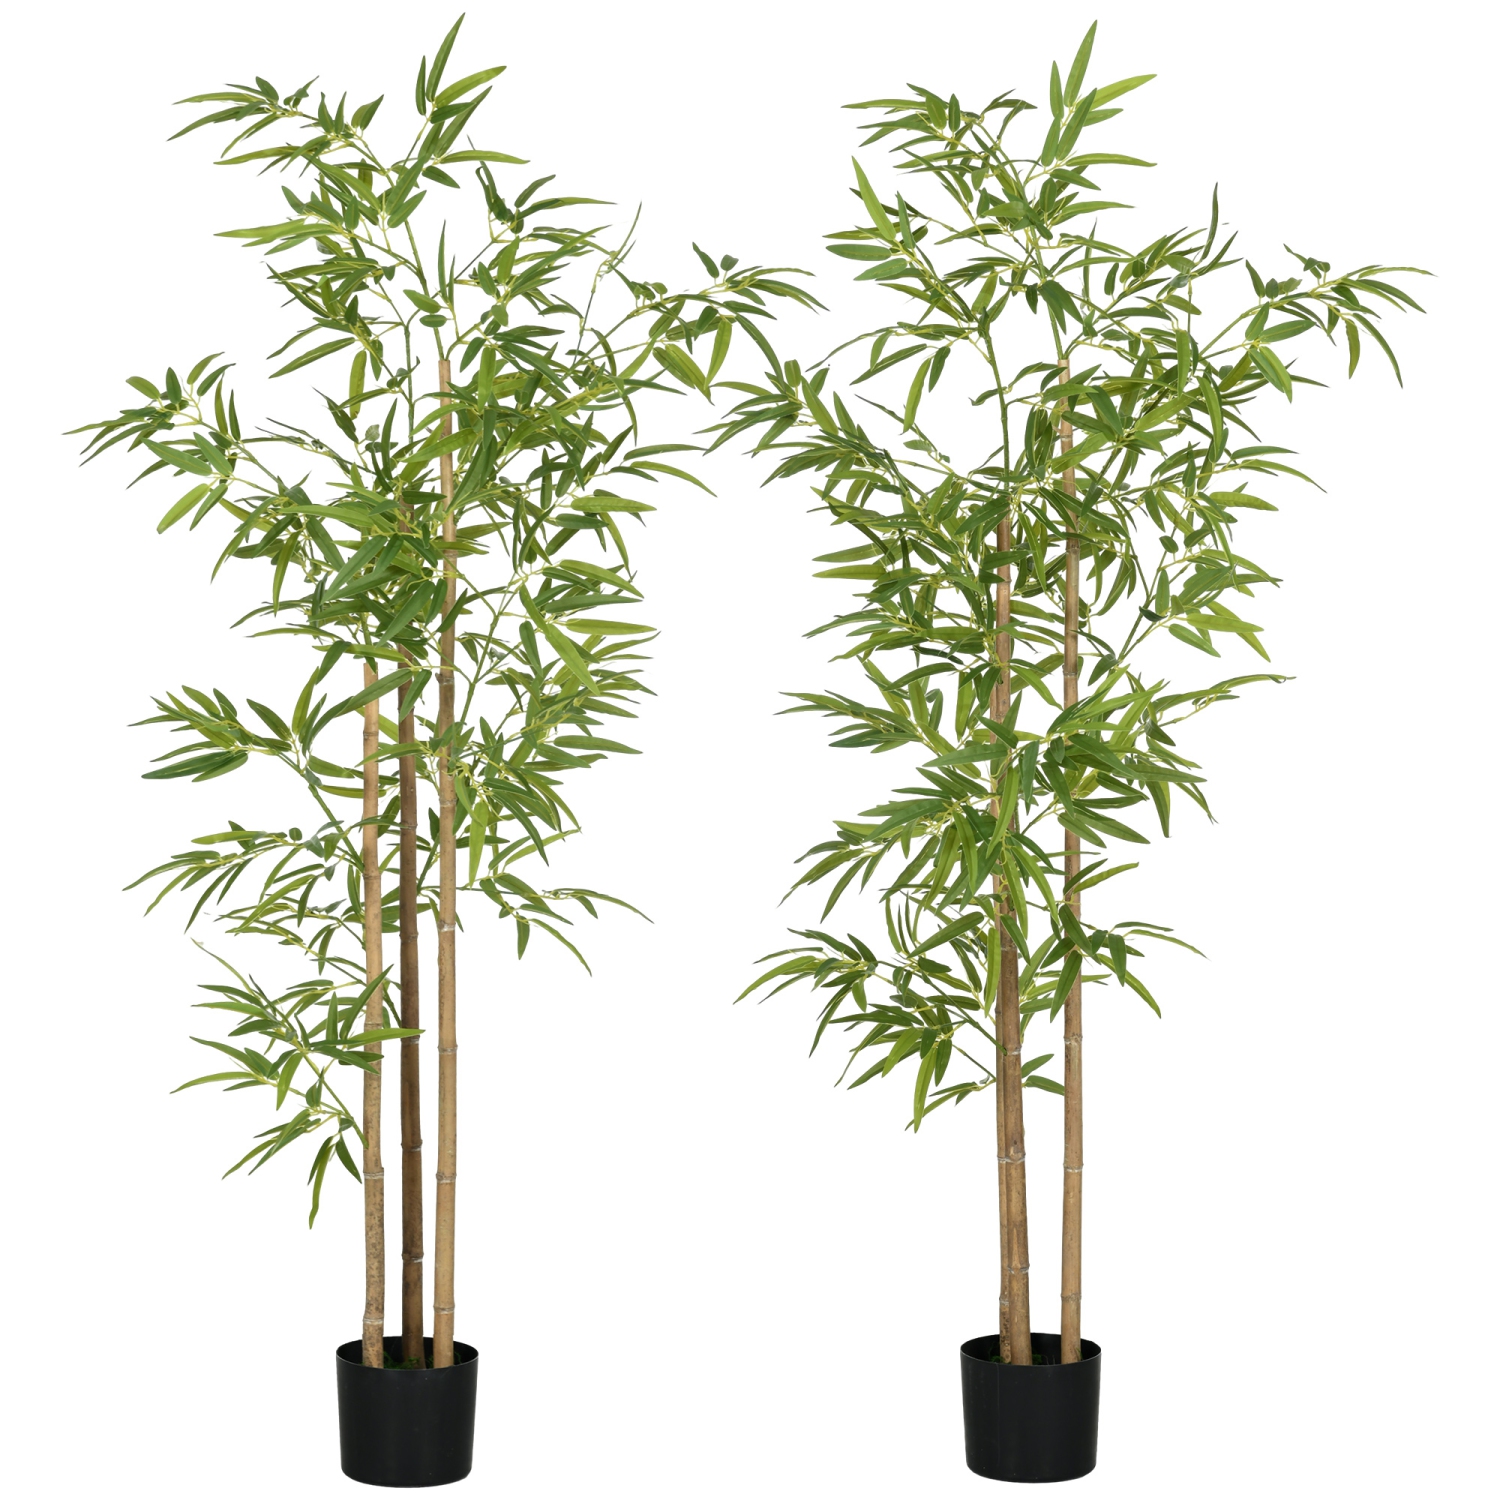 HOMCOM 6ft Set of 2 Artificial Bamboo with Pot, Indoor Fake Plants for Home Office Living Room Decor